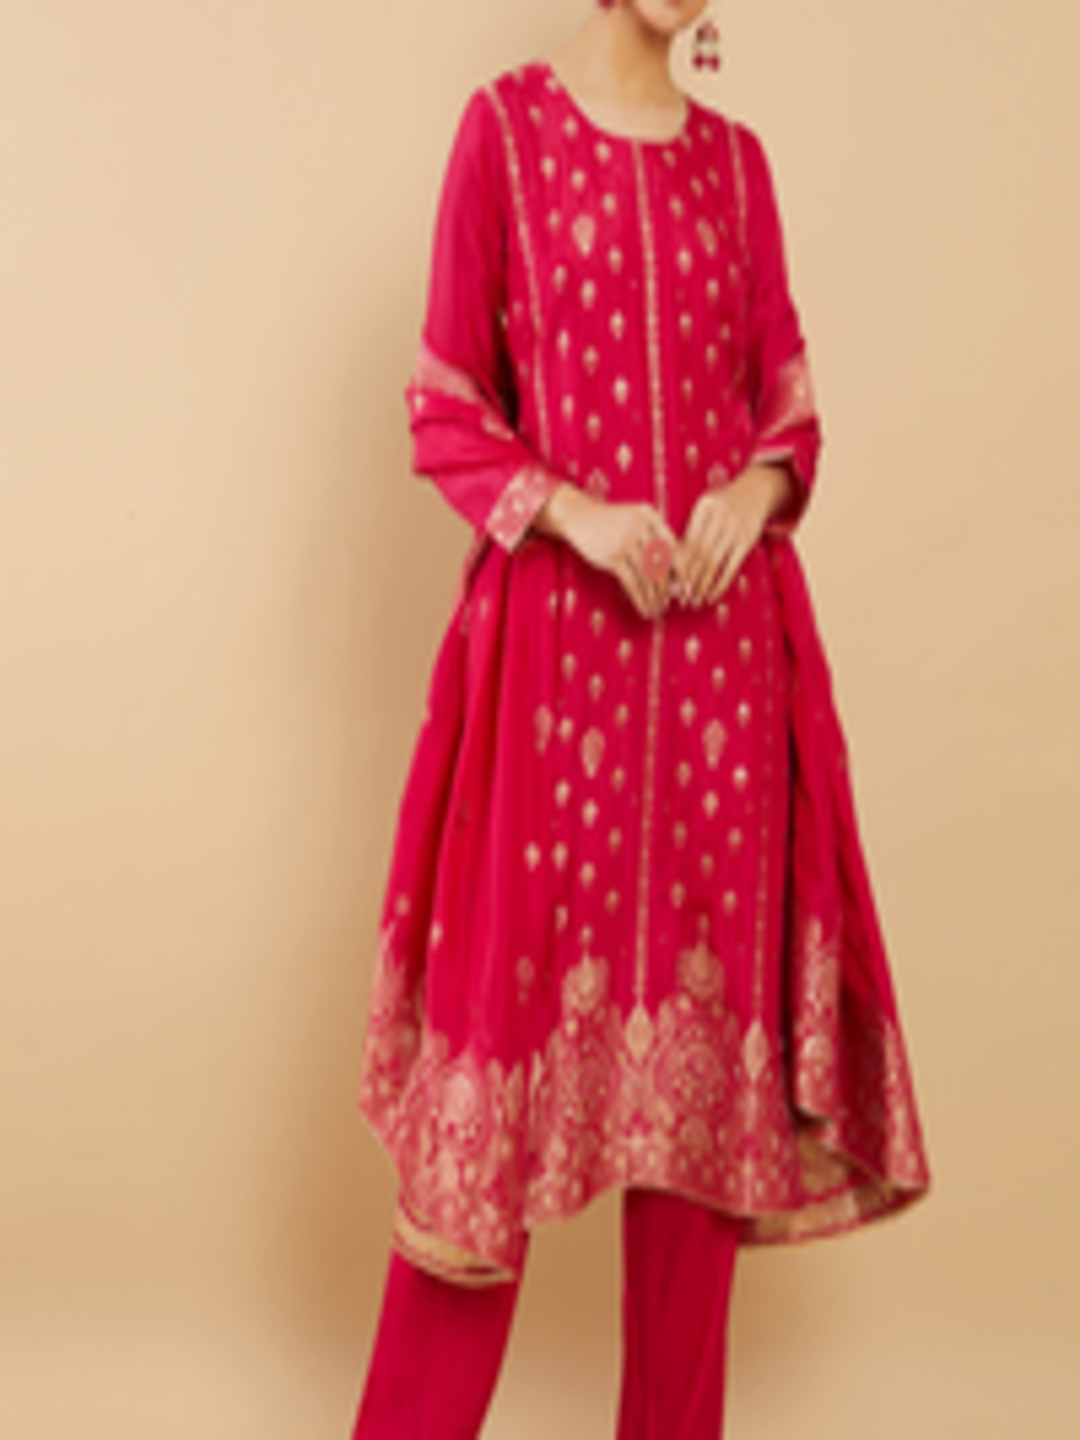 Buy Soch Fuchsia & Gold Toned Printed Unstitched Dress Material - Dress ...